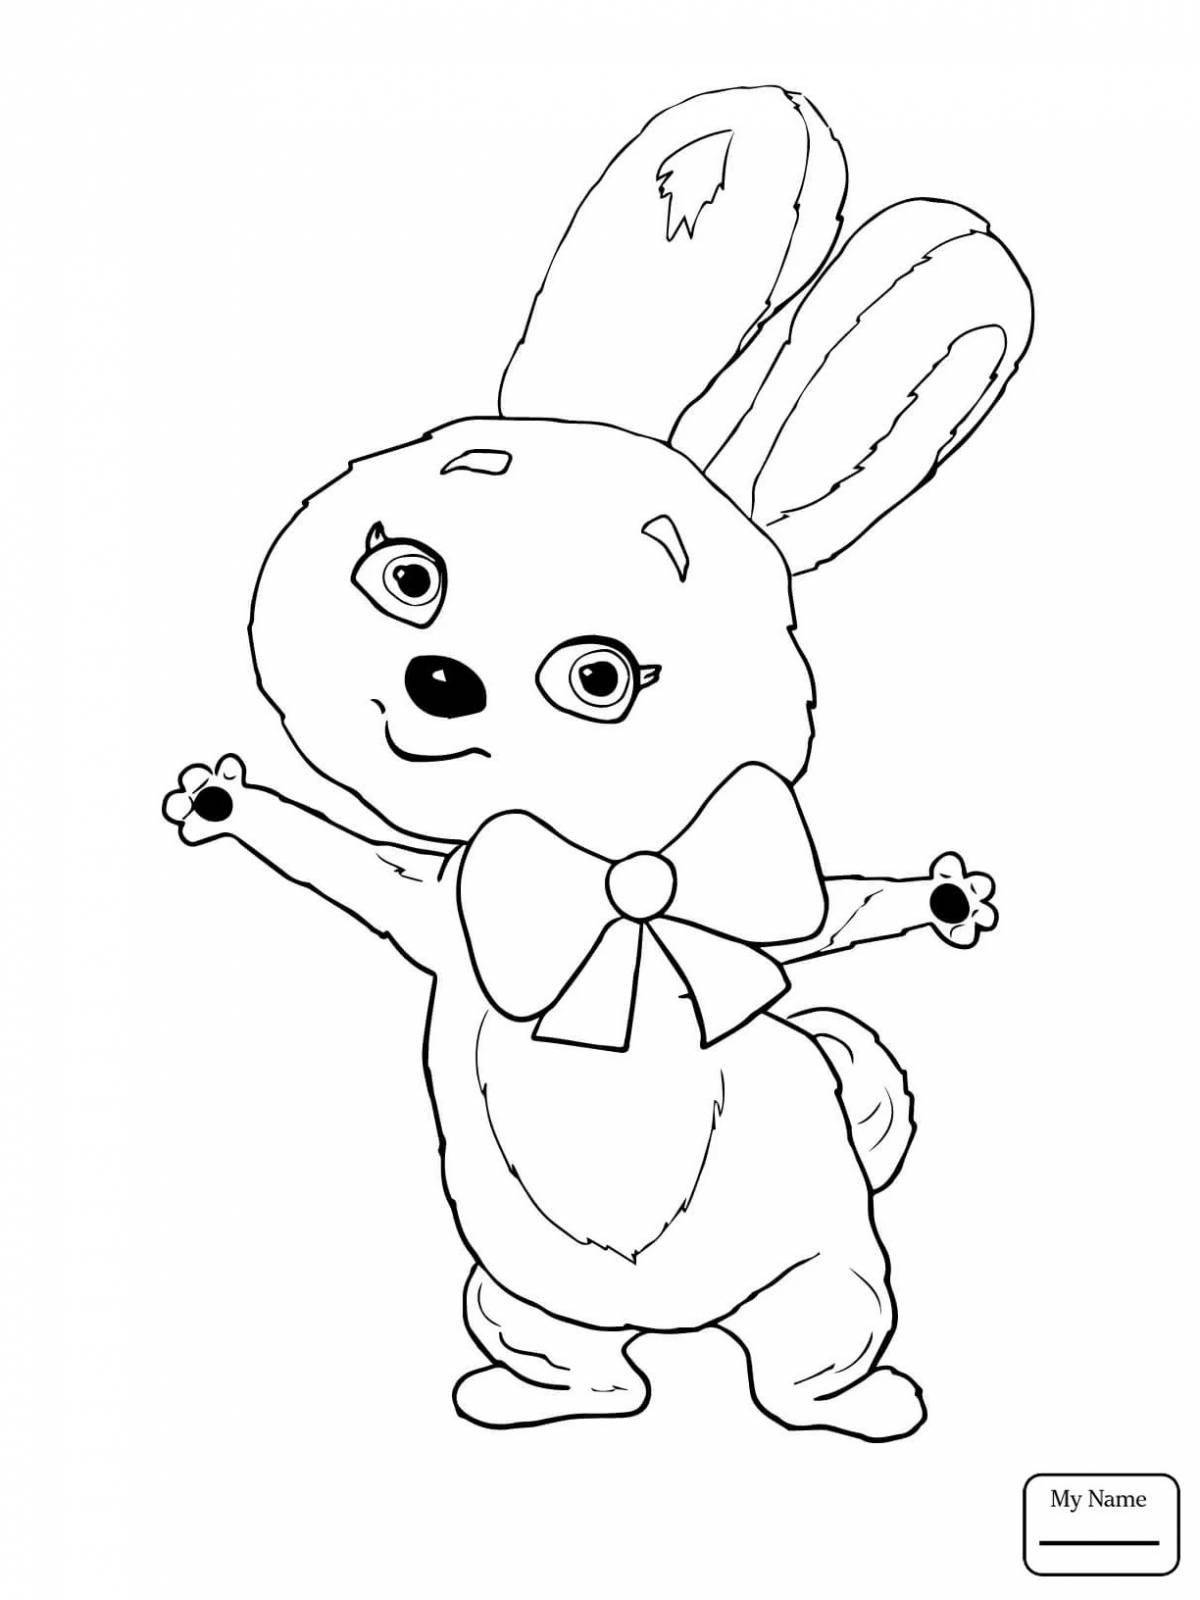 Wiggly coloring page bunny with a bow